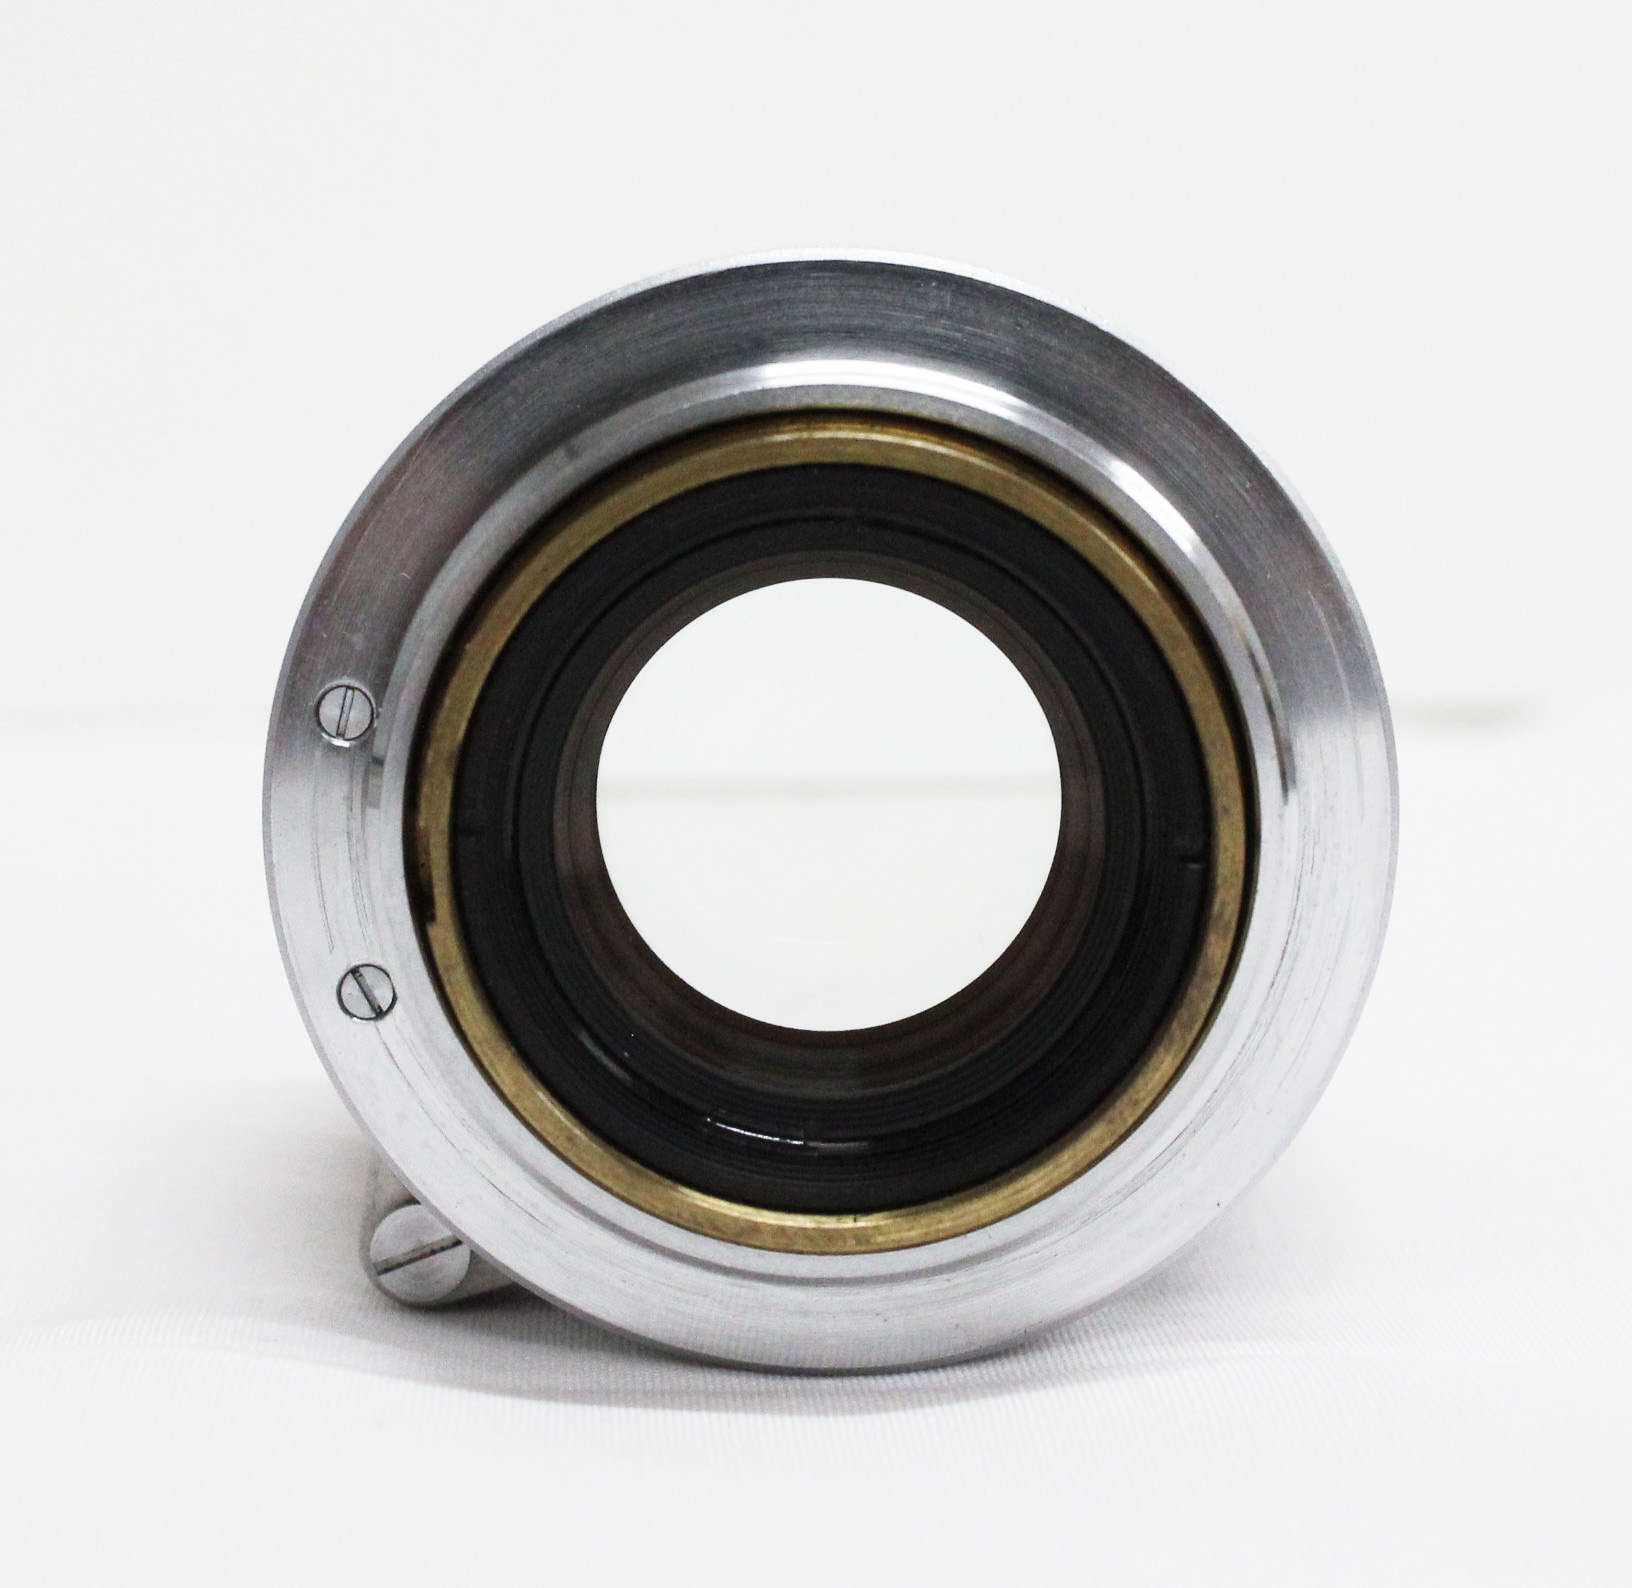  Canon 50mm F/1.8 Leica L39 Screw Mount Lens from Japan Photo 2